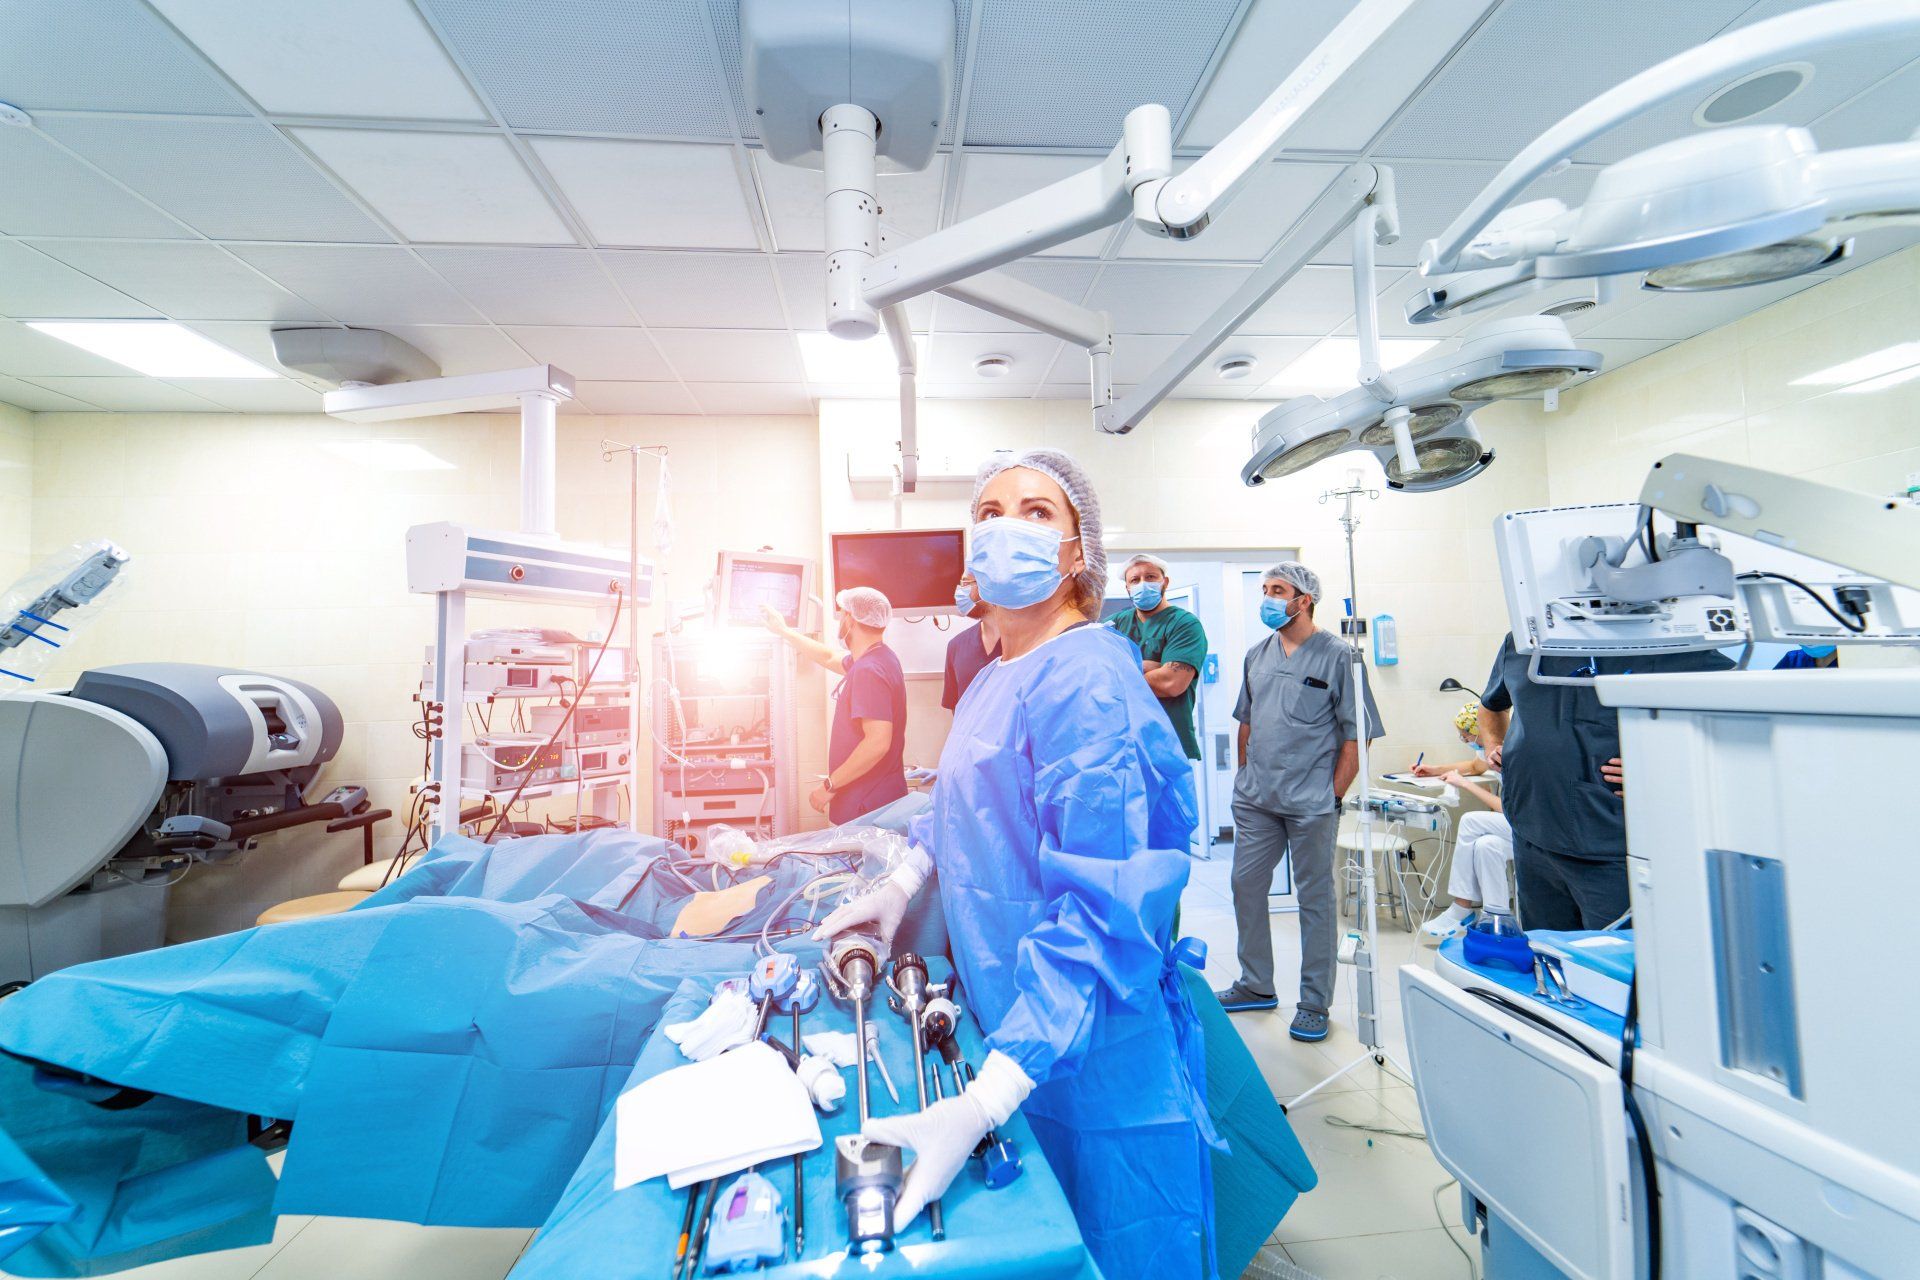 A group of surgeons are performing surgery in an operating room.